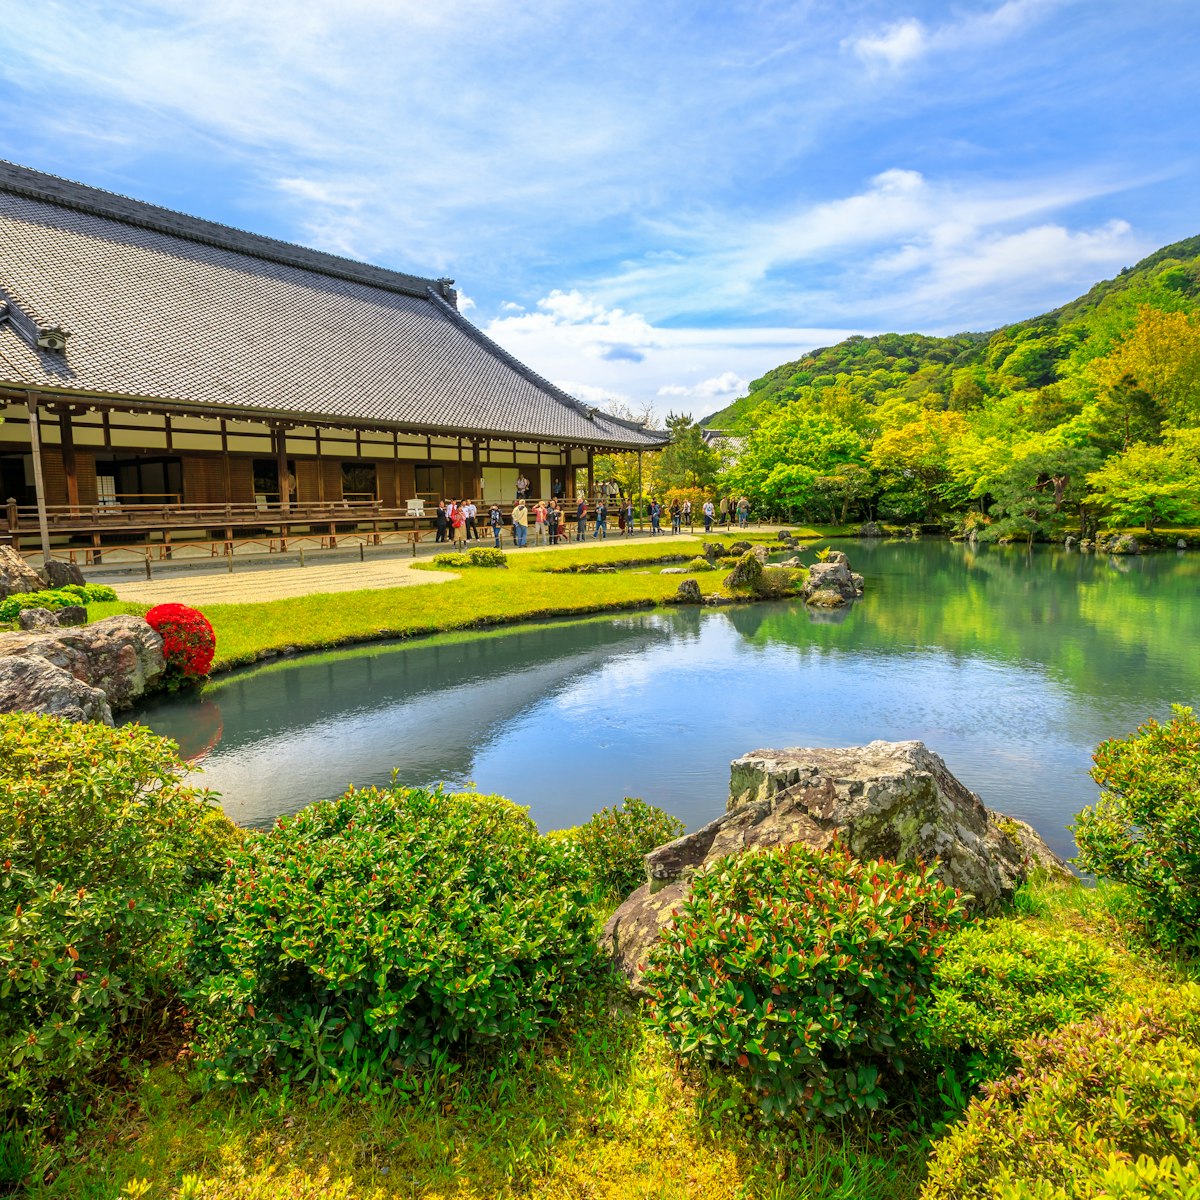 Kyoto, Japan - April 27, 2017: Hojo Hall and picturesque Sogen Garden or Sogenchi Teien with a circular promenade centered around Sogen-chi Pond in Tenryu-ji Zen Temple in Arashiyama. Springtime.
925512942